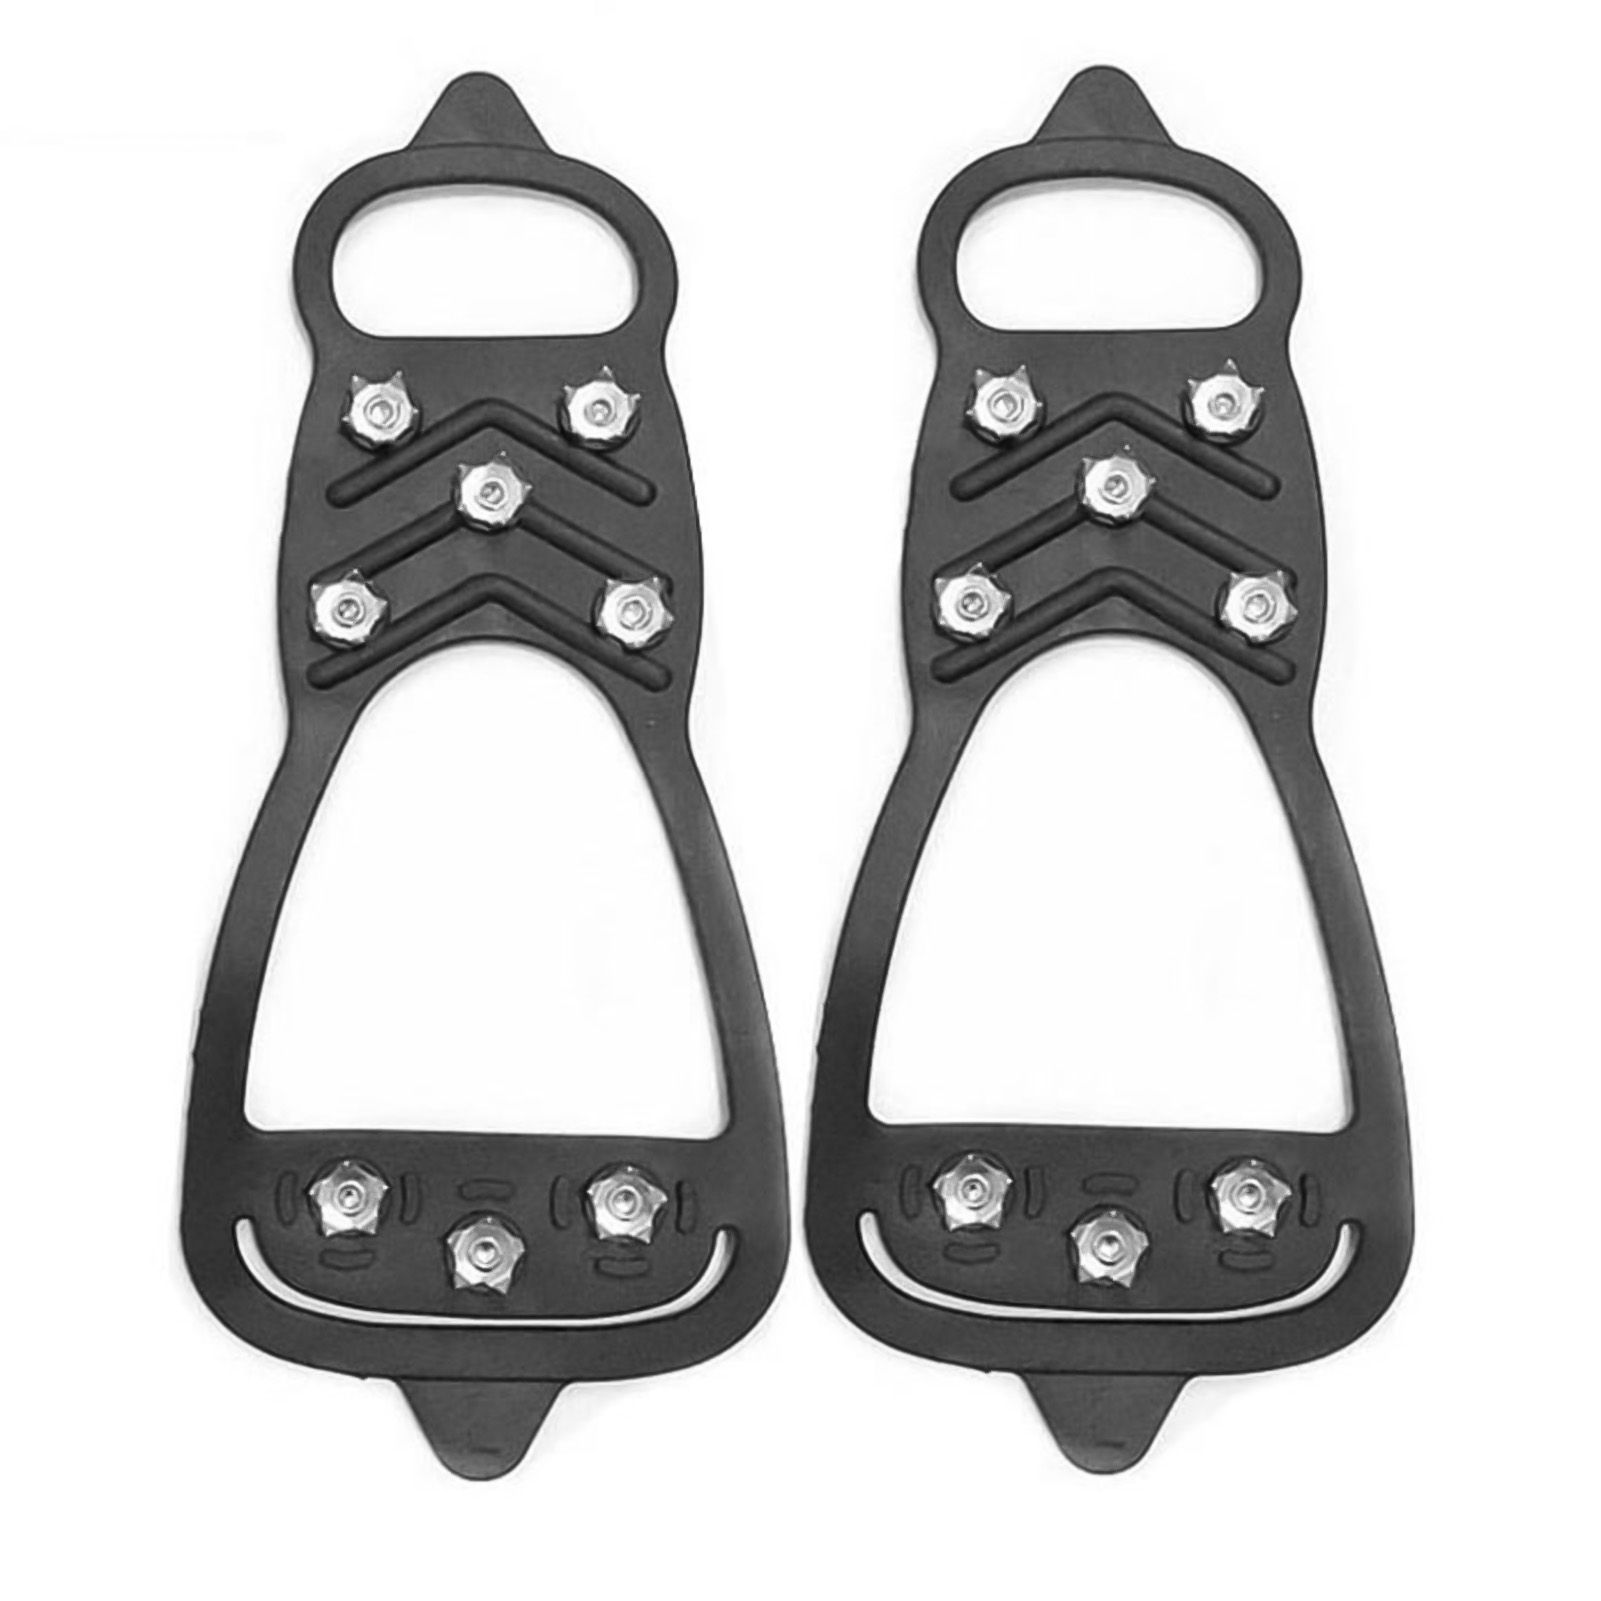 SPRING PARK 2Pcs Non-Slip 8-tooth Over Shoe, Climbing Snow Ice Cleats Grips Studded Ice Traction Shoe Covers Spike Crampons Cleats Size Outdoor Travel Equipment - image 1 of 1